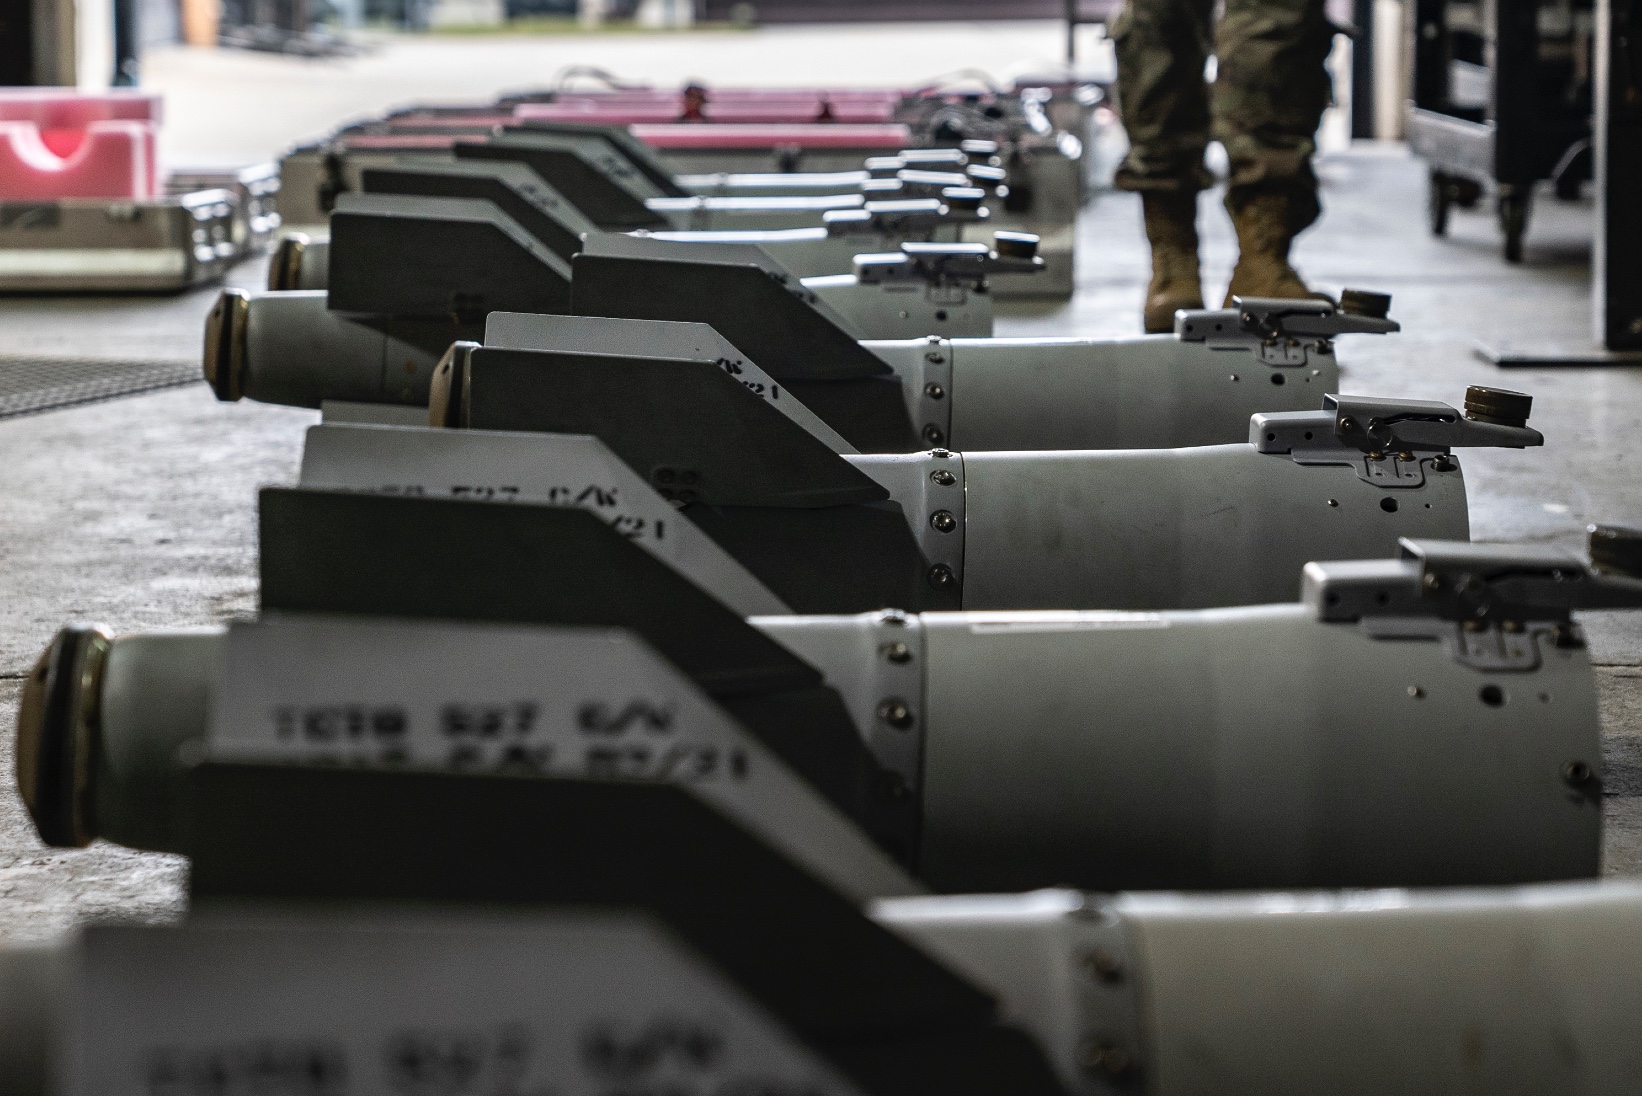 Joint Direct Attack Munitions tail kits are ready to be assembled onto GBU-54’s by 48th Munitions Squadron Airmen at Royal Air Force Lakenheath, England, Feb. 22, 2021